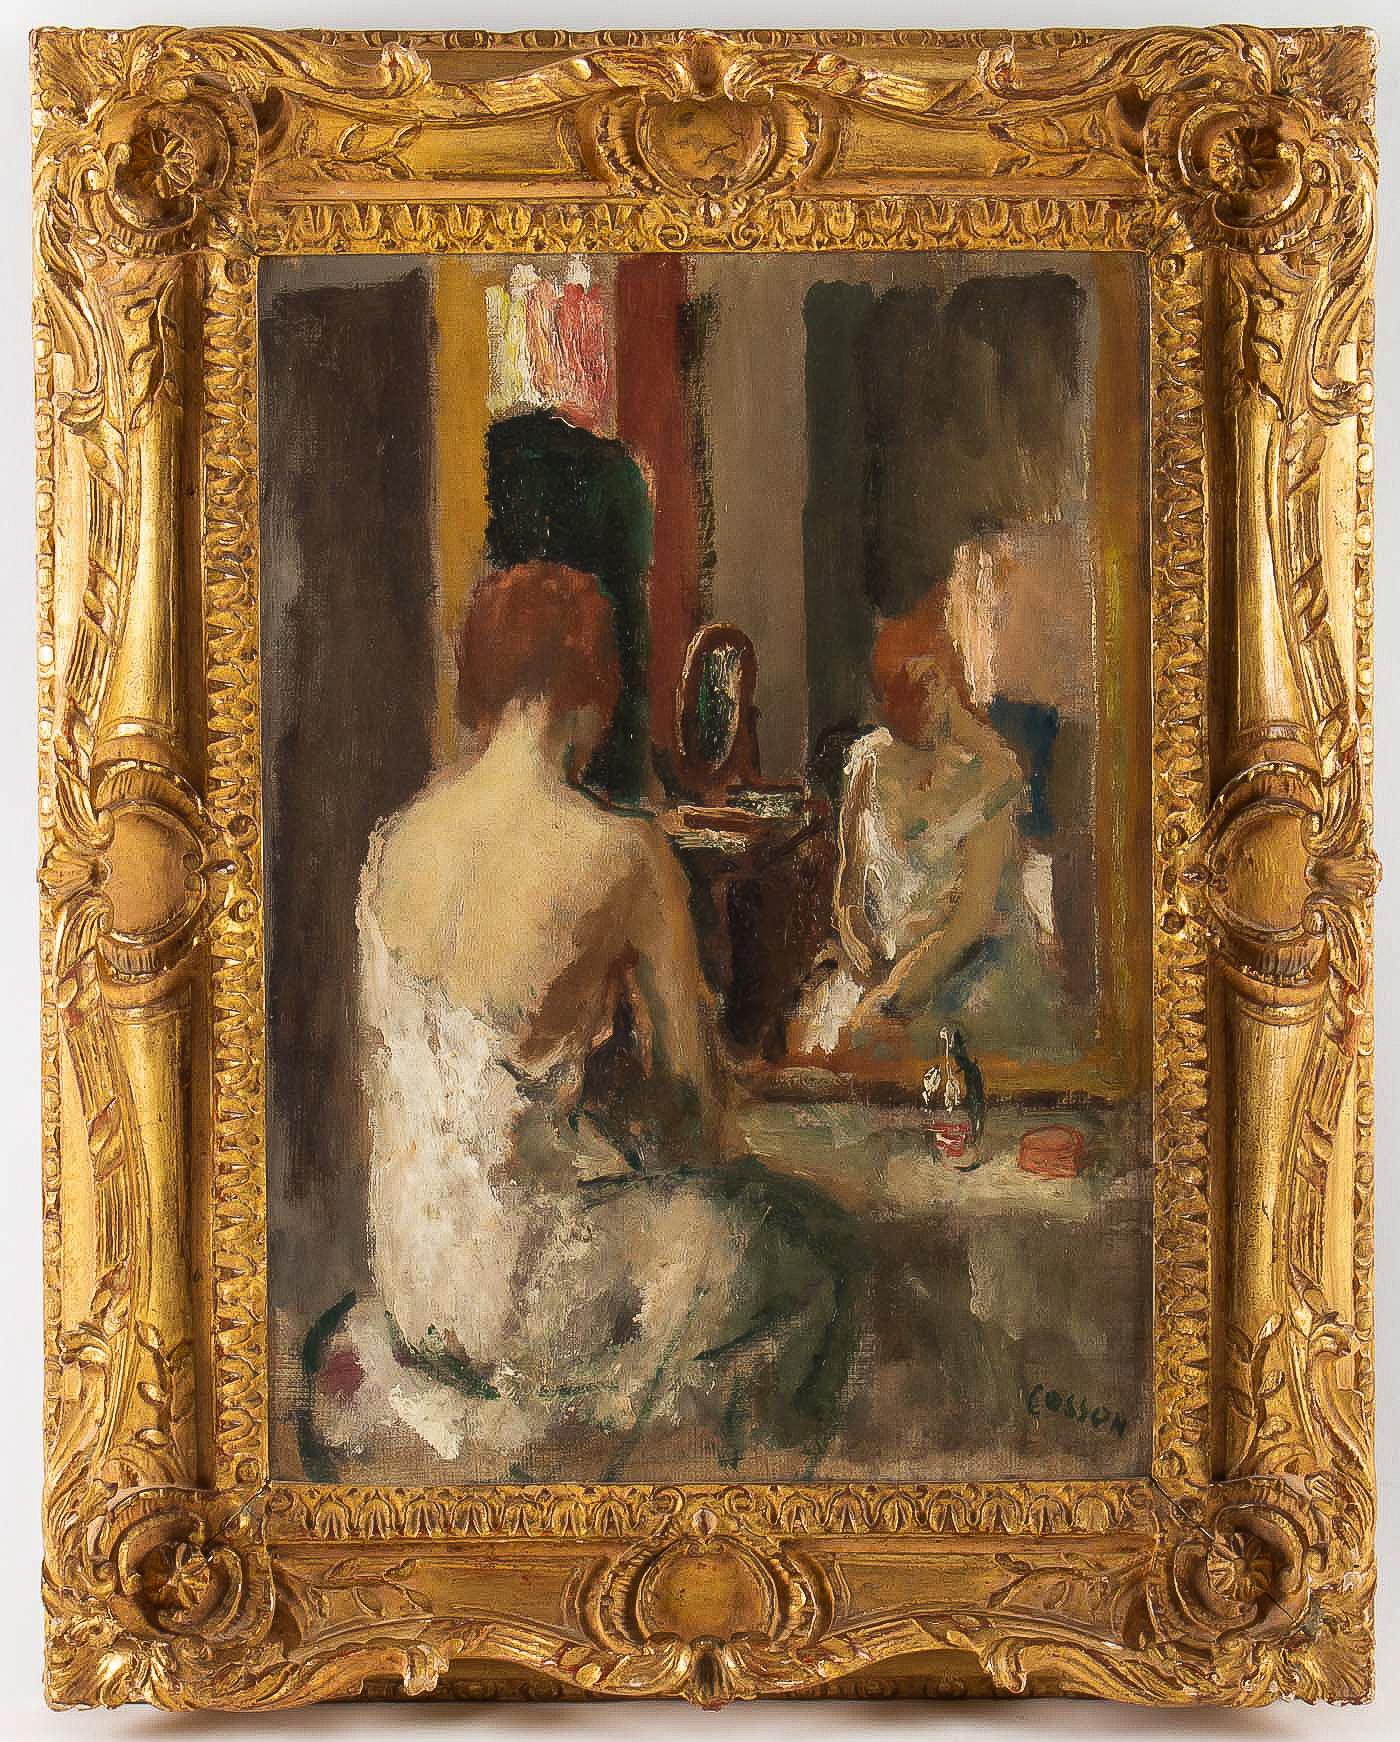 Marcel Cosson oil on canvas back dancer in his box, circa 1900.

An interesting oil on canvas by Marcel Cosson. He reveals to us the intimacy of a Dancer of the Opera with this view of the back in a box.

Lovely French school in the style of